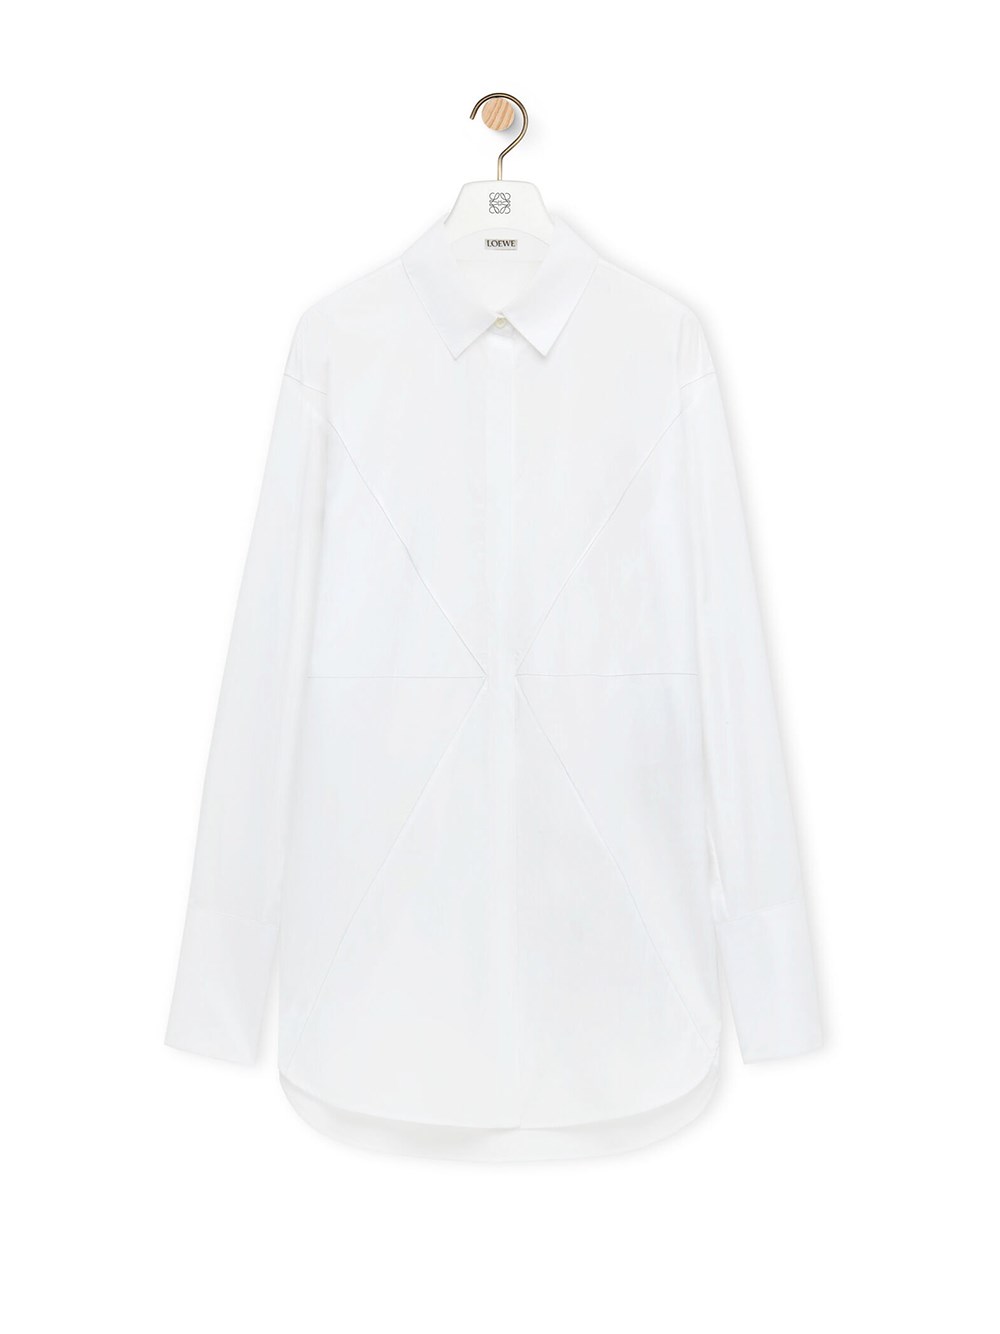 LOEWE PUZZLE FOLD SHIRT IN COTTON